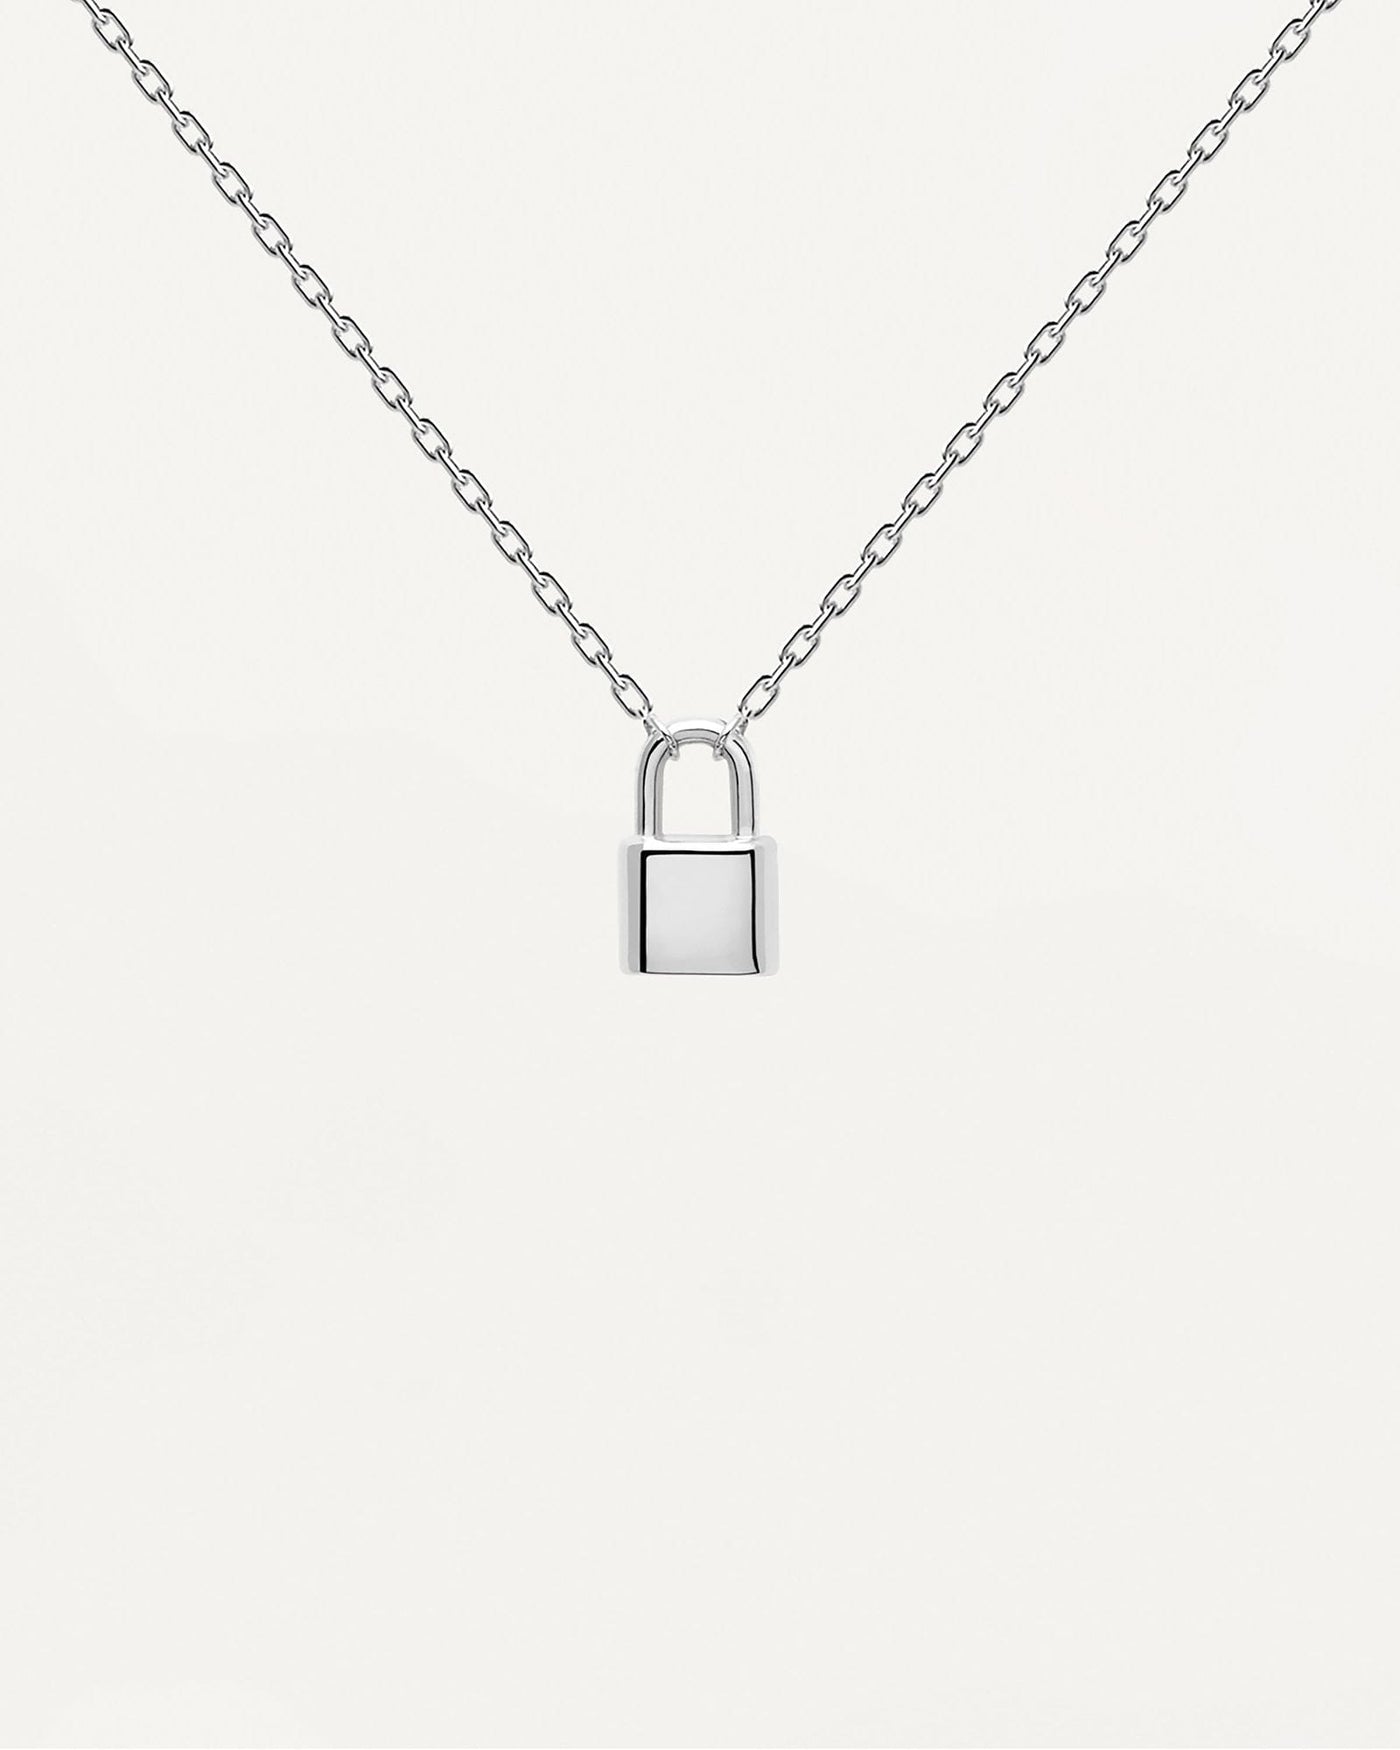 2024 Selection | Bond Silver Necklace. Sterling silver necklace with padlock pendant to personalize. Get the latest arrival from PDPAOLA. Place your order safely and get this Best Seller. Free Shipping.